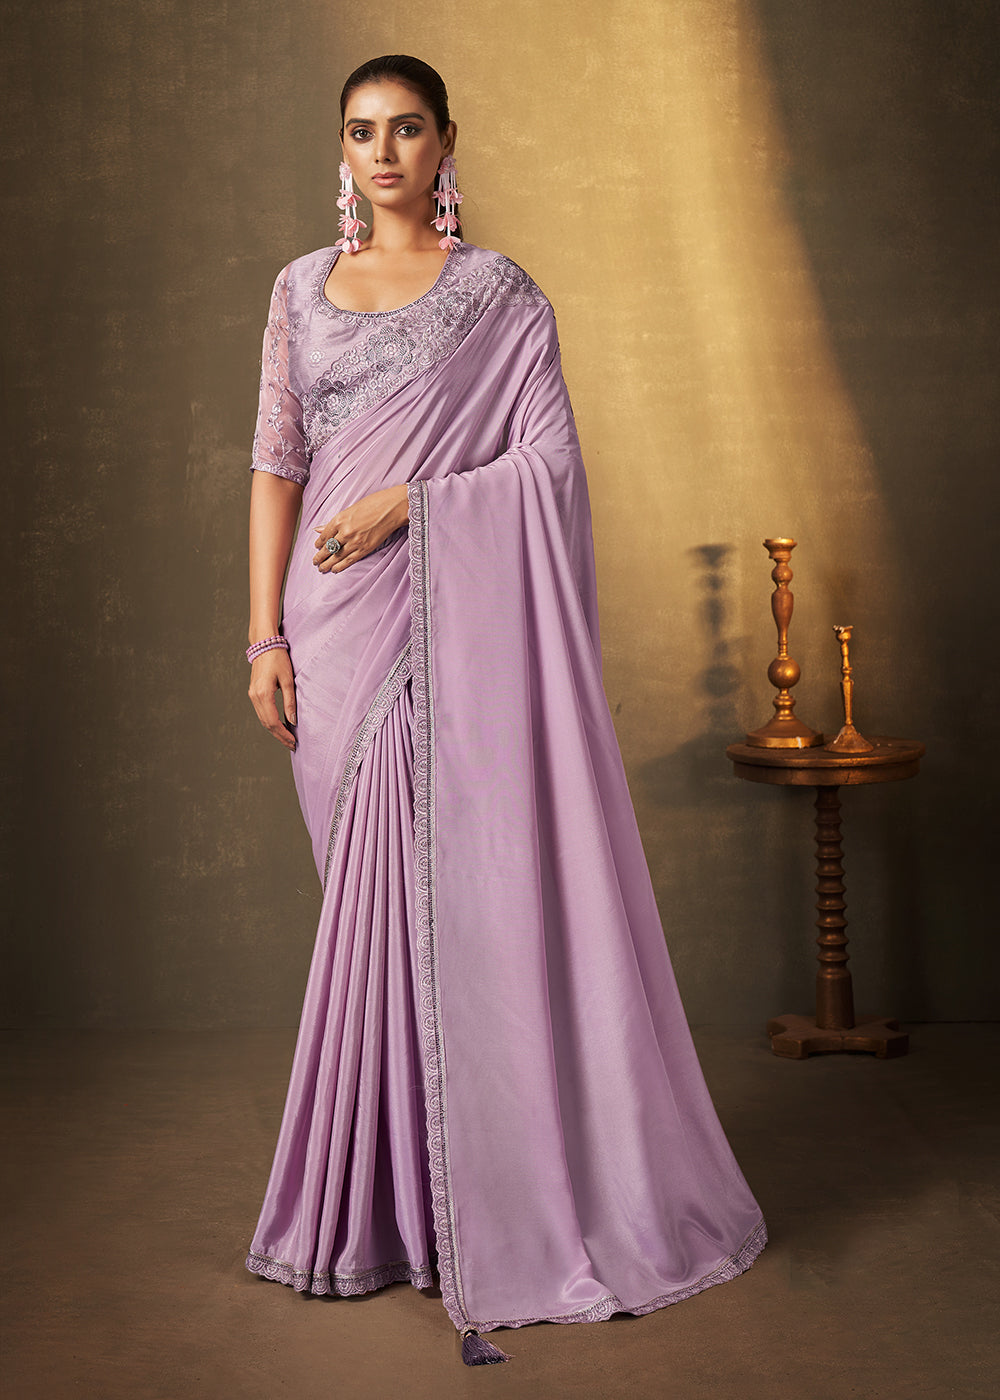 Buy Now Lavender Crepe Georgette Silk Designer Saree Online in USA, UK, Canada & Worldwide at Empress Clothing. T